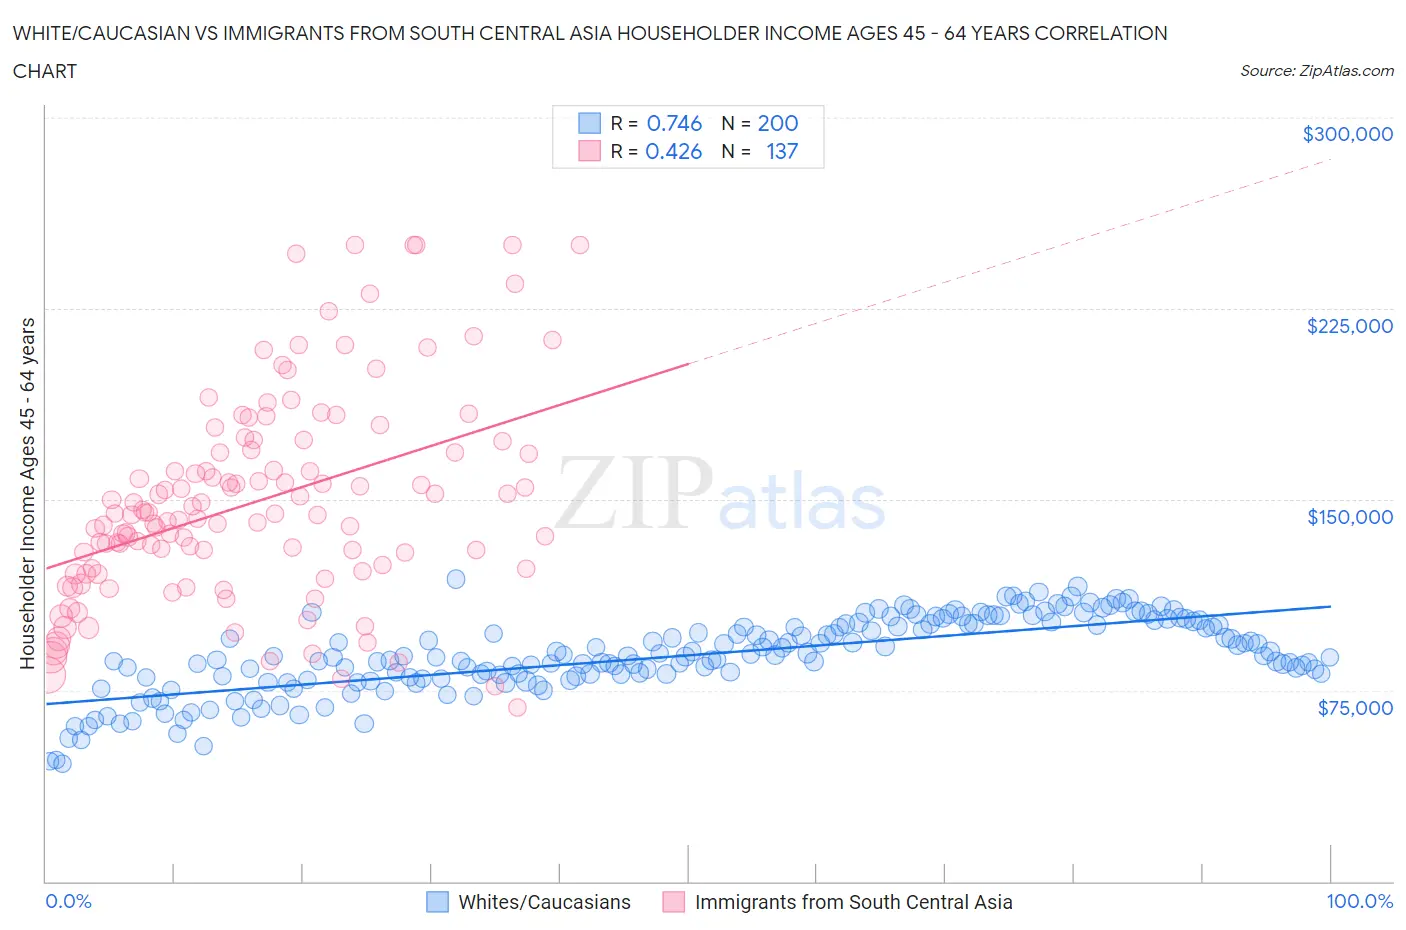 White/Caucasian vs Immigrants from South Central Asia Householder Income Ages 45 - 64 years